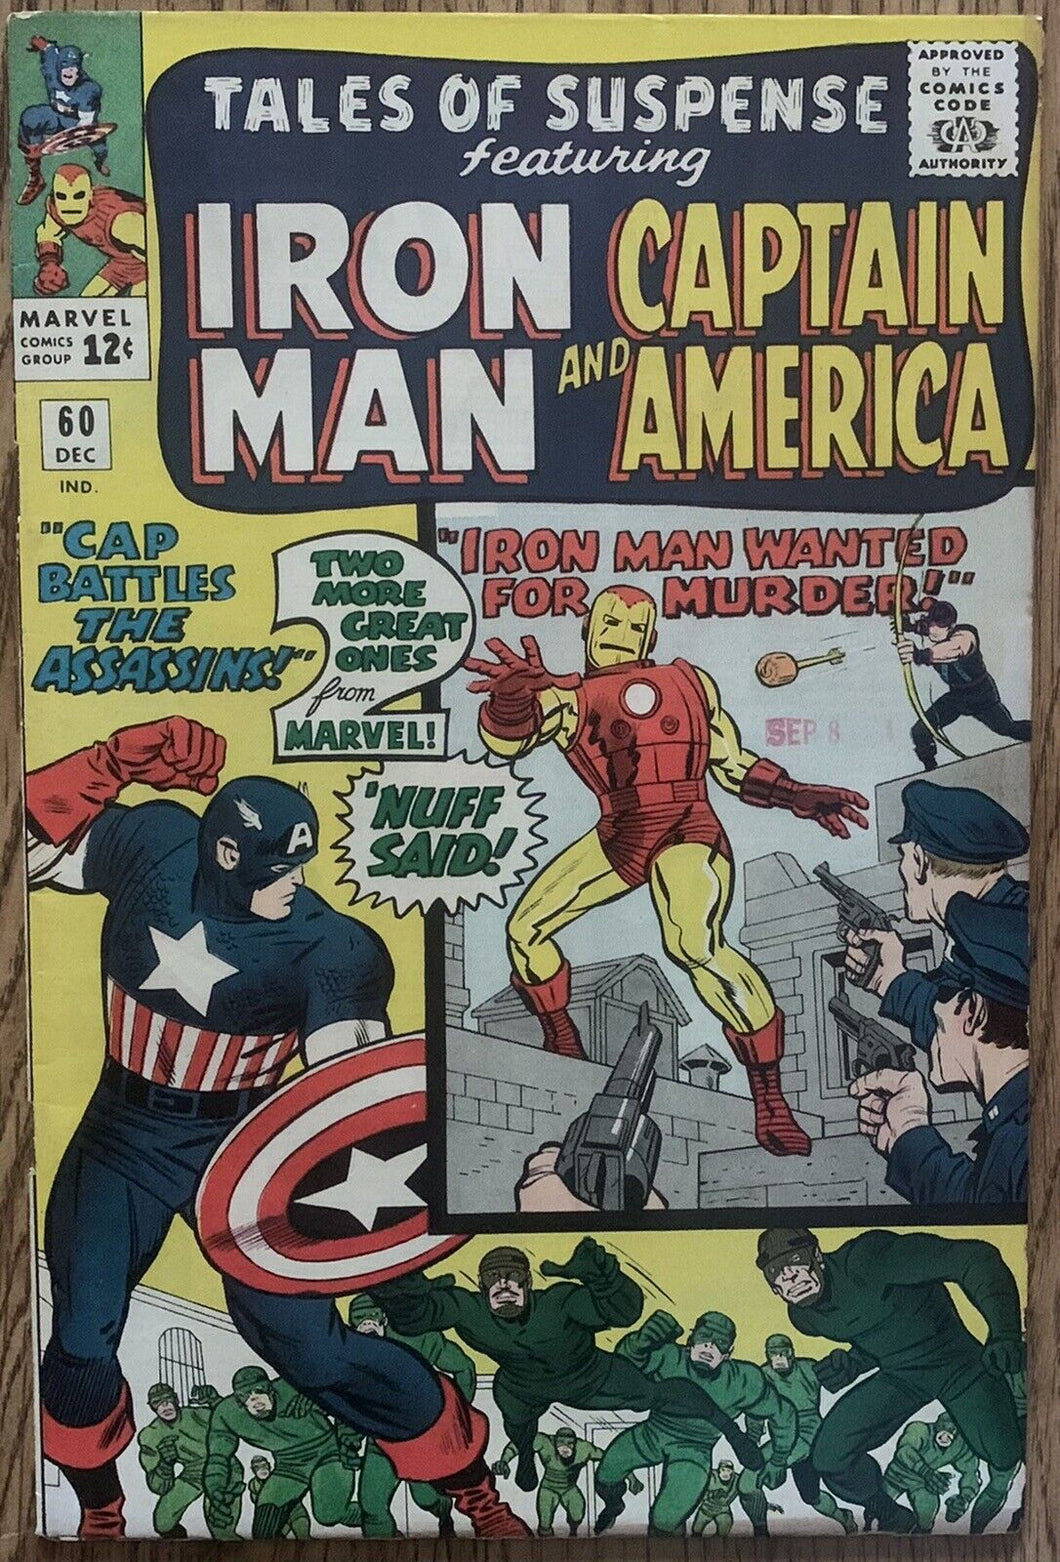 TALES OF SUSPENSE #60 (MARVEL,1964) 2ND APPEARANCE OF HAWKEYE